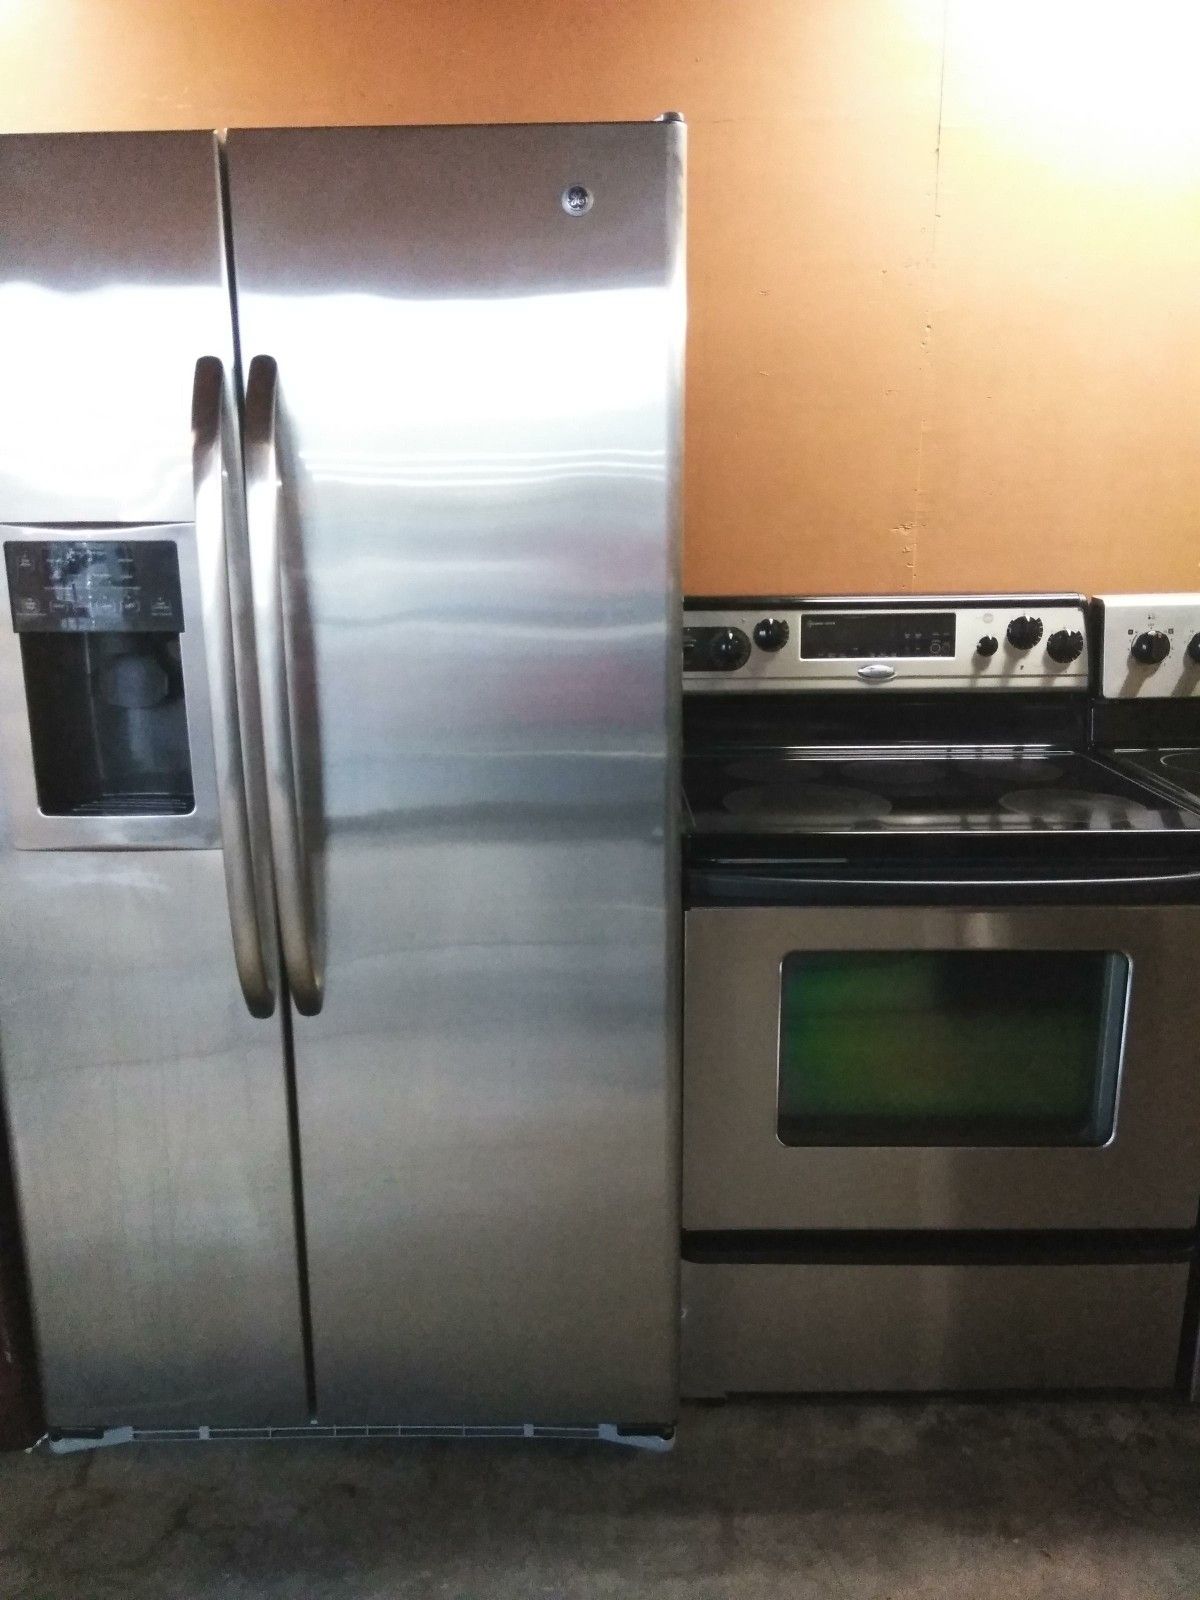 Whirlpool stainless steel refrigerator and stove